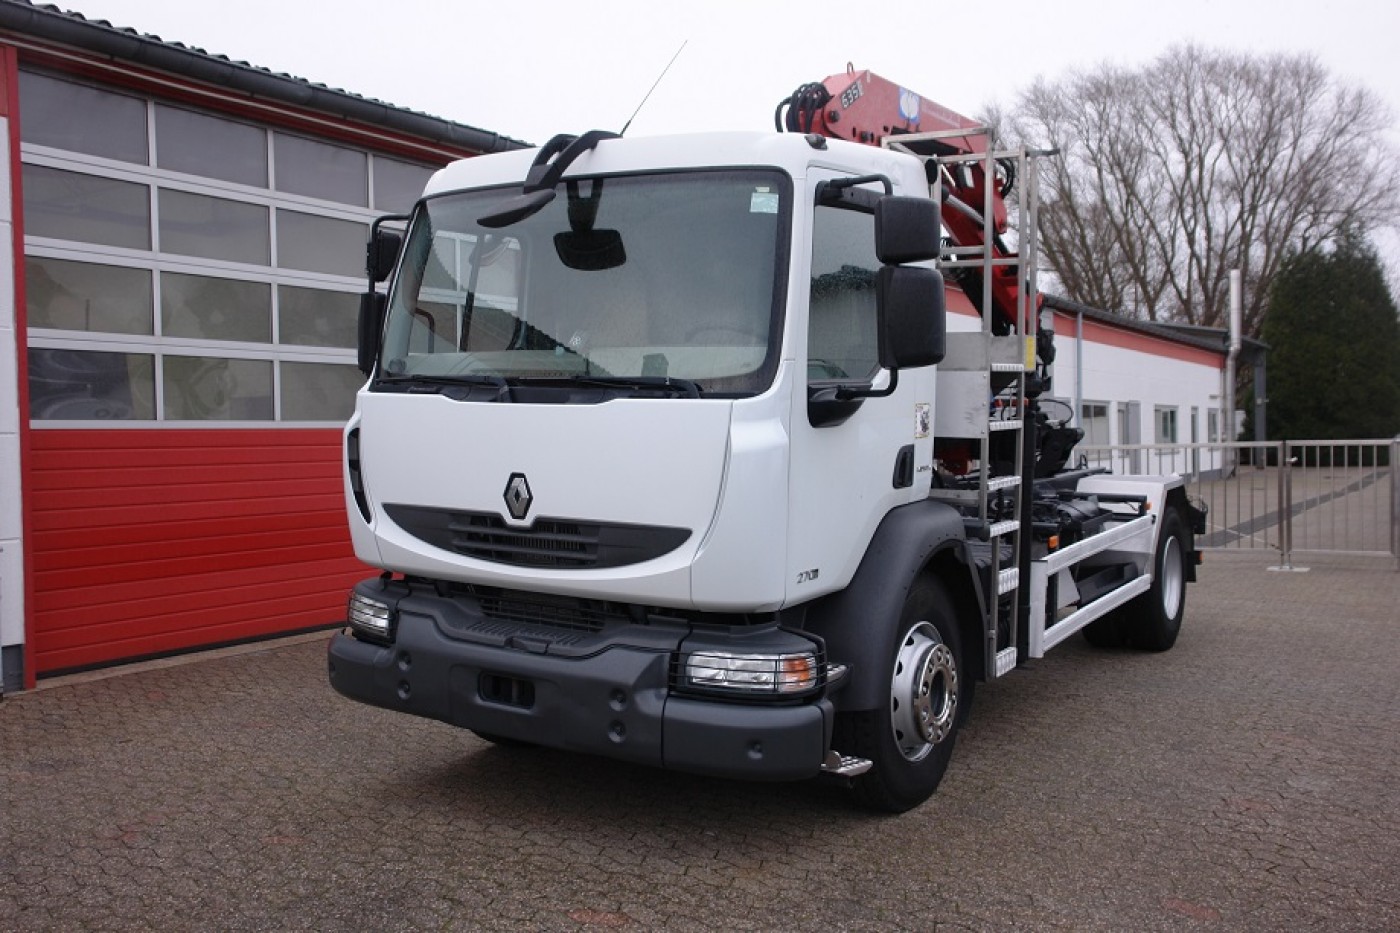 Renault - Midlum 270Dxi tipper crane 635HMF 2 extensions tipping device EURO5